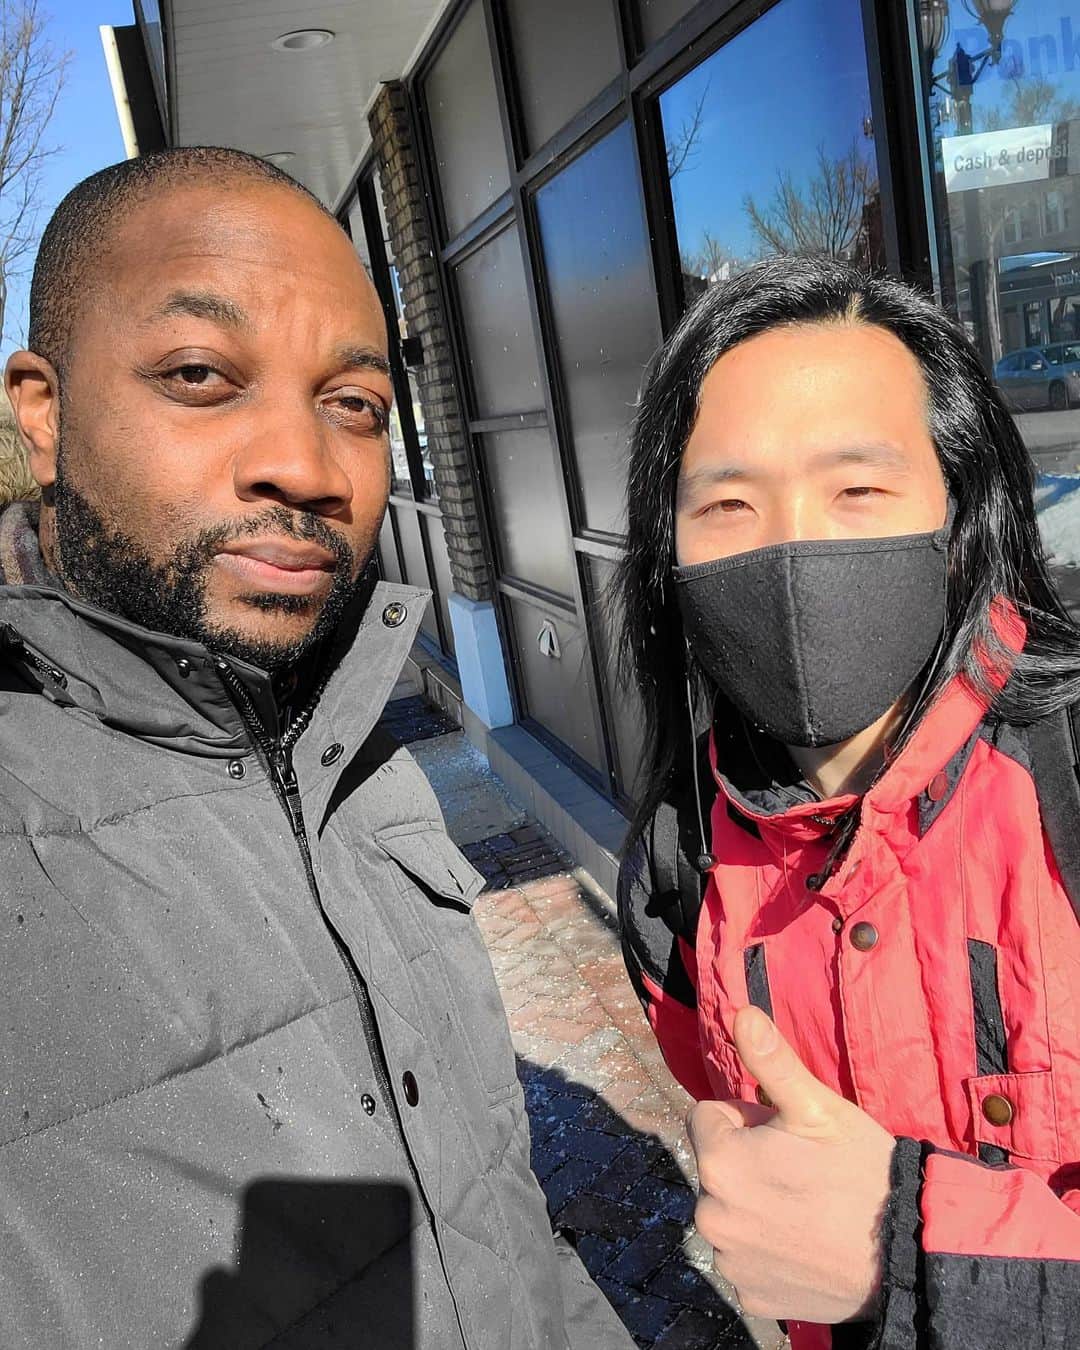 call me Lix the 6-Toyのインスタグラム：「I help out my community both black and brown. I see no color. Me and @kimteddie out picking up some groceries and duct tape today and oil for his electric bike...each one teach one from African American to 🇰🇷 Listen to some Bugzee Lix slapz💤 here: bugzeelix.bandcamp.com   Telegram Group: t.me/bugzeelixofficial  New Bugzee Lix album "LiXRP" coming soon!!   Follow my Twitter: BugzeeLix Follow my YouTube: BugzeeLix #nj #NJrealtor #ManCity #Teaneck #koreanstyle #grmdaily #mixtapemadness 폭포 🙆🏾📸🌊 #oppa #꿀잼 #치맥#남친 #xxl  #대박 #불금 #헐 #멘붕  #베프 #신음소리 #훈남 #사랑해요   #khiphop #공주병 #BugzeeLix」